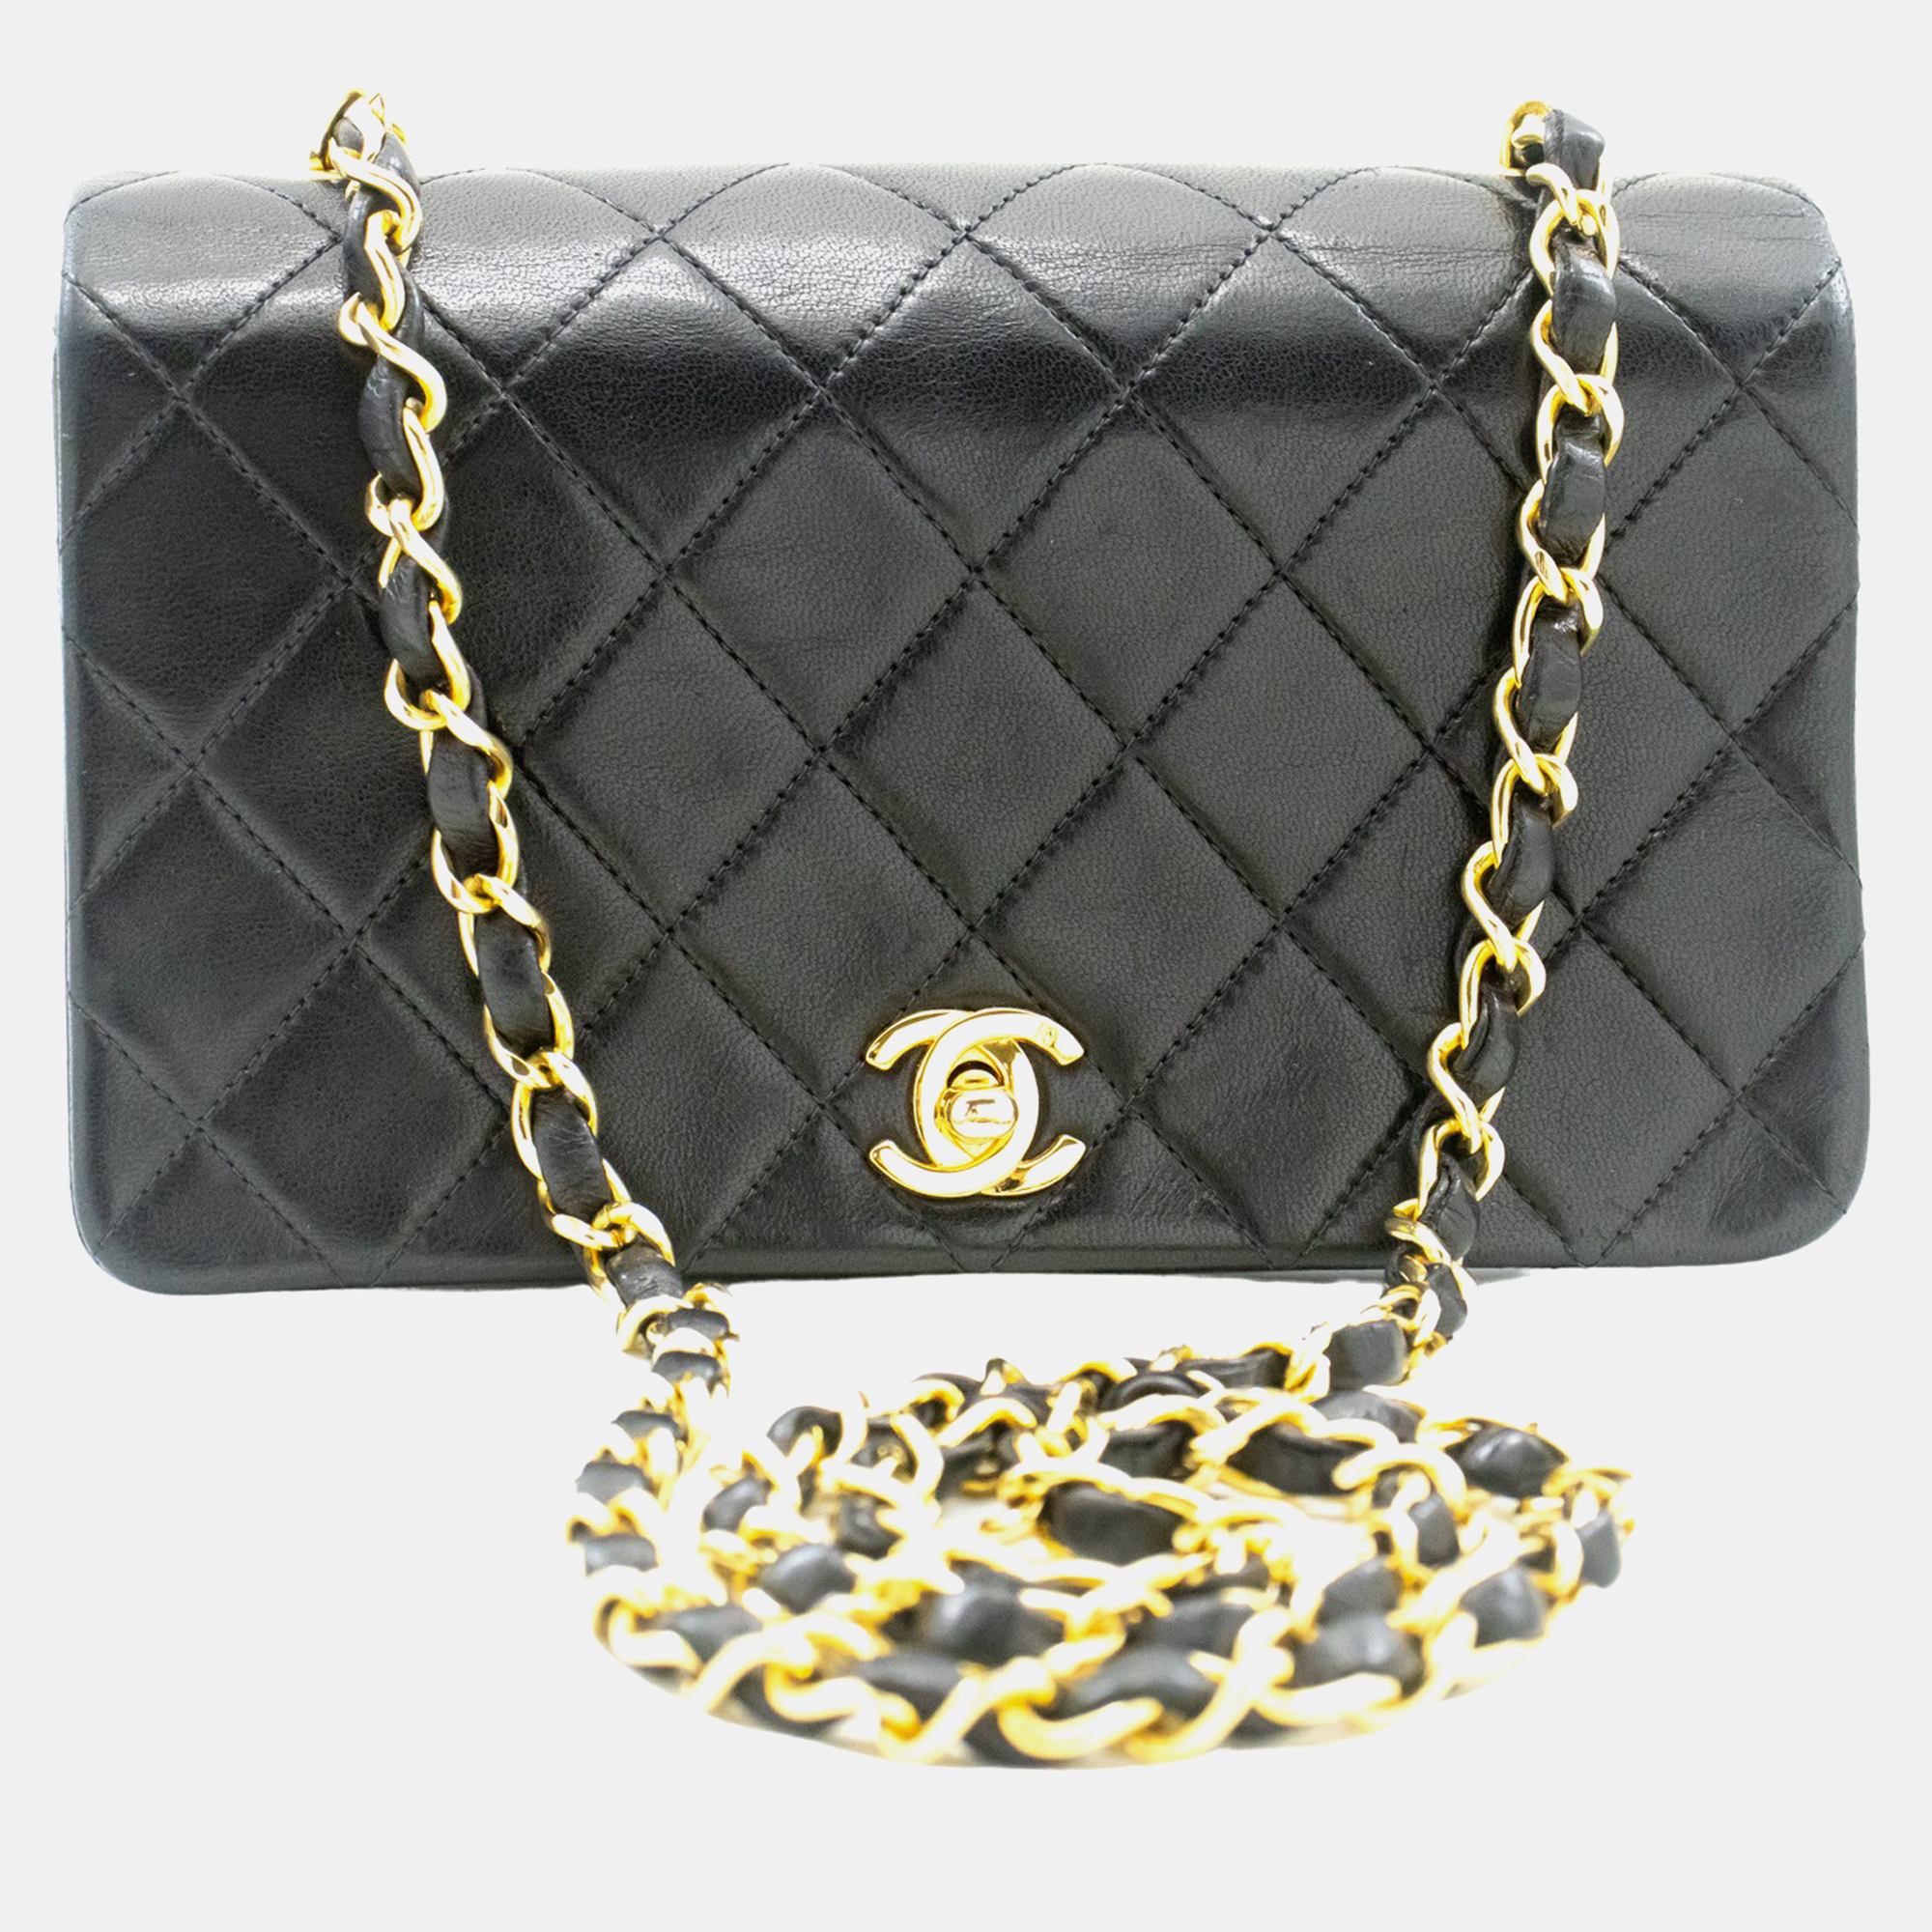 Chanel black quilted lambskin leather full single flap bag